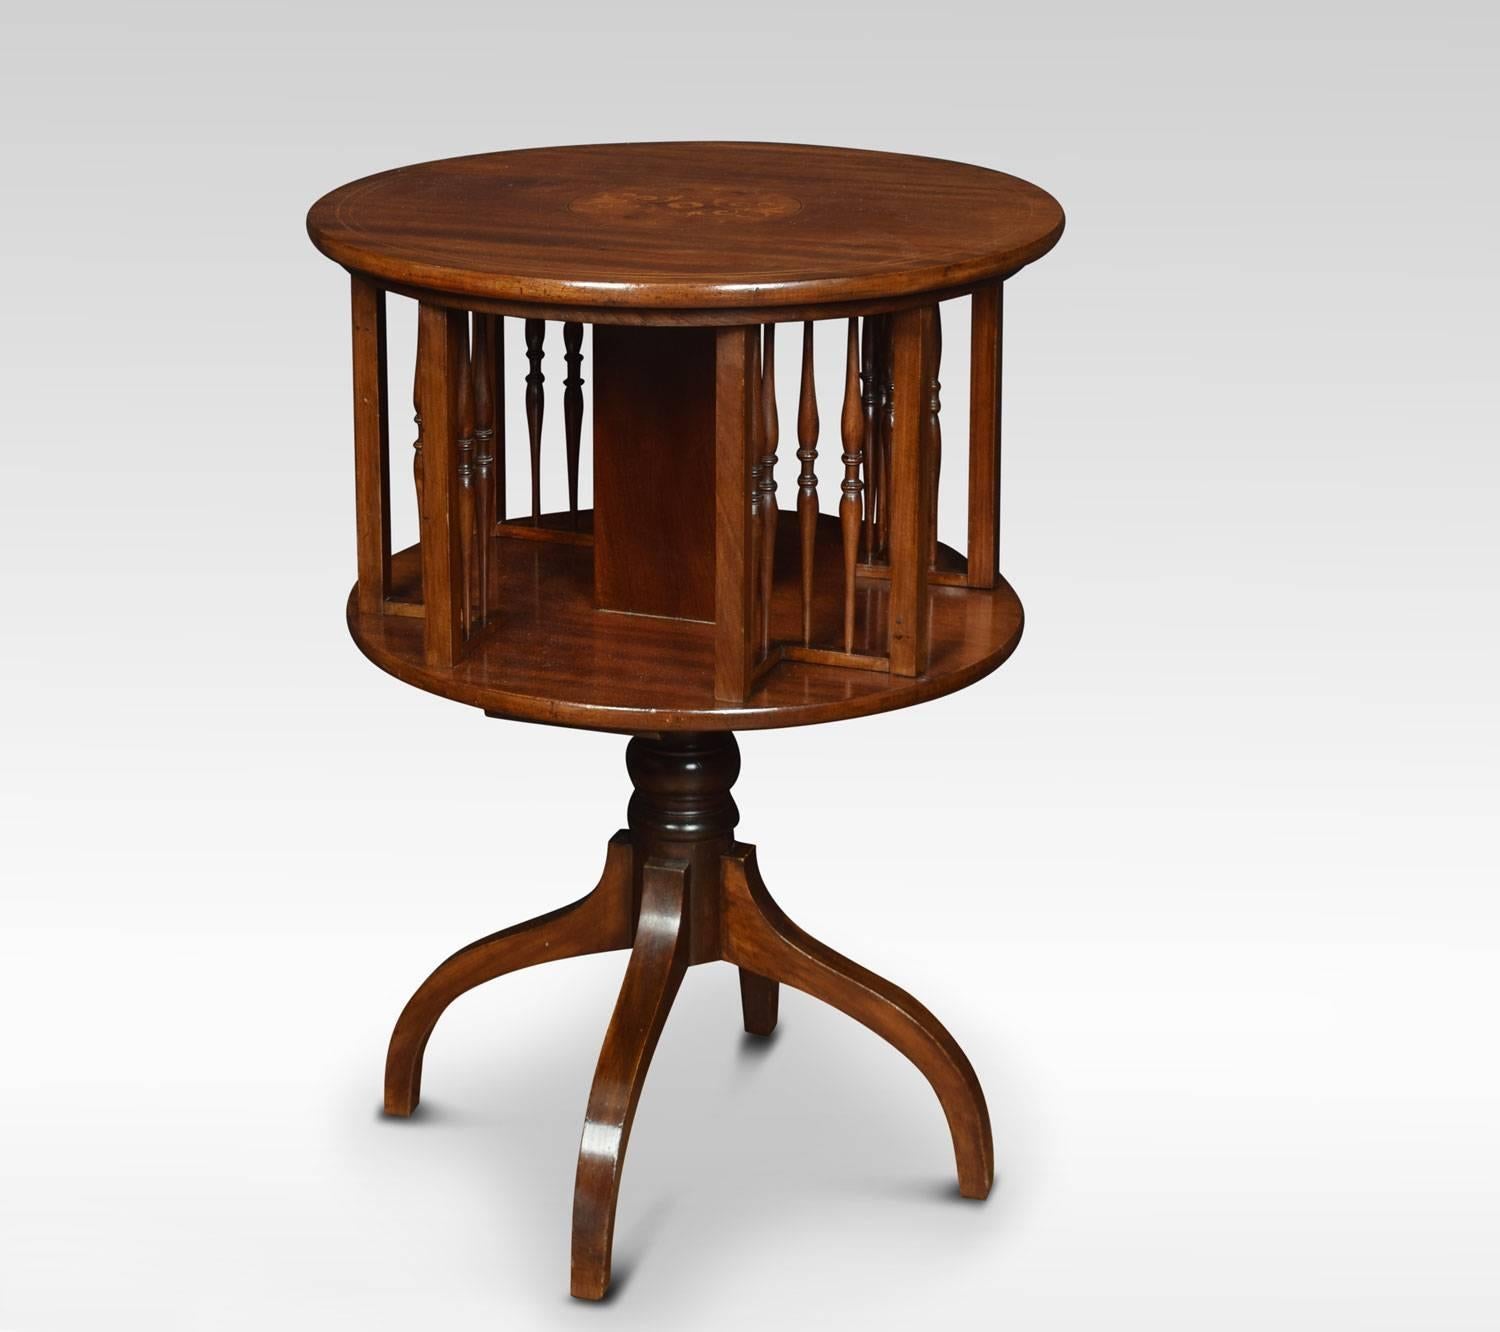 Edwardian mahogany revolving book table, the circular inlaid foliated top above spindle divides, raised on downswept legs.
Dimensions
Height 28.5 inches
Width 20.5 inches
Depth 20.5 inches.